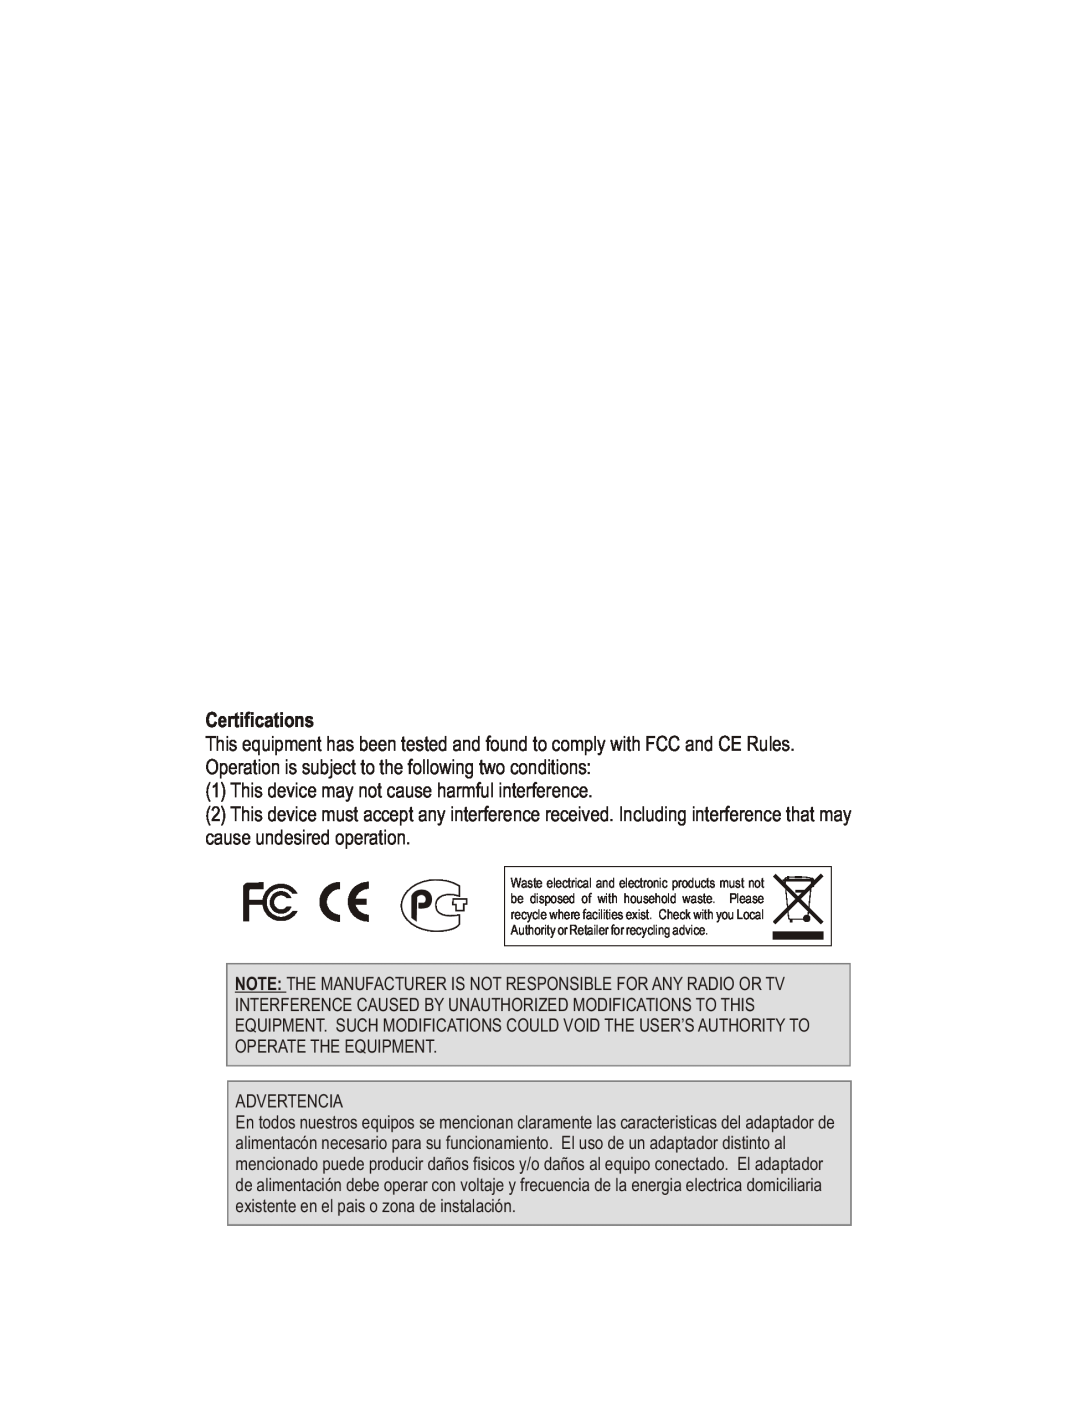 TRENDnet TE100-S16R manual Certifications, This device may not cause harmful interference 